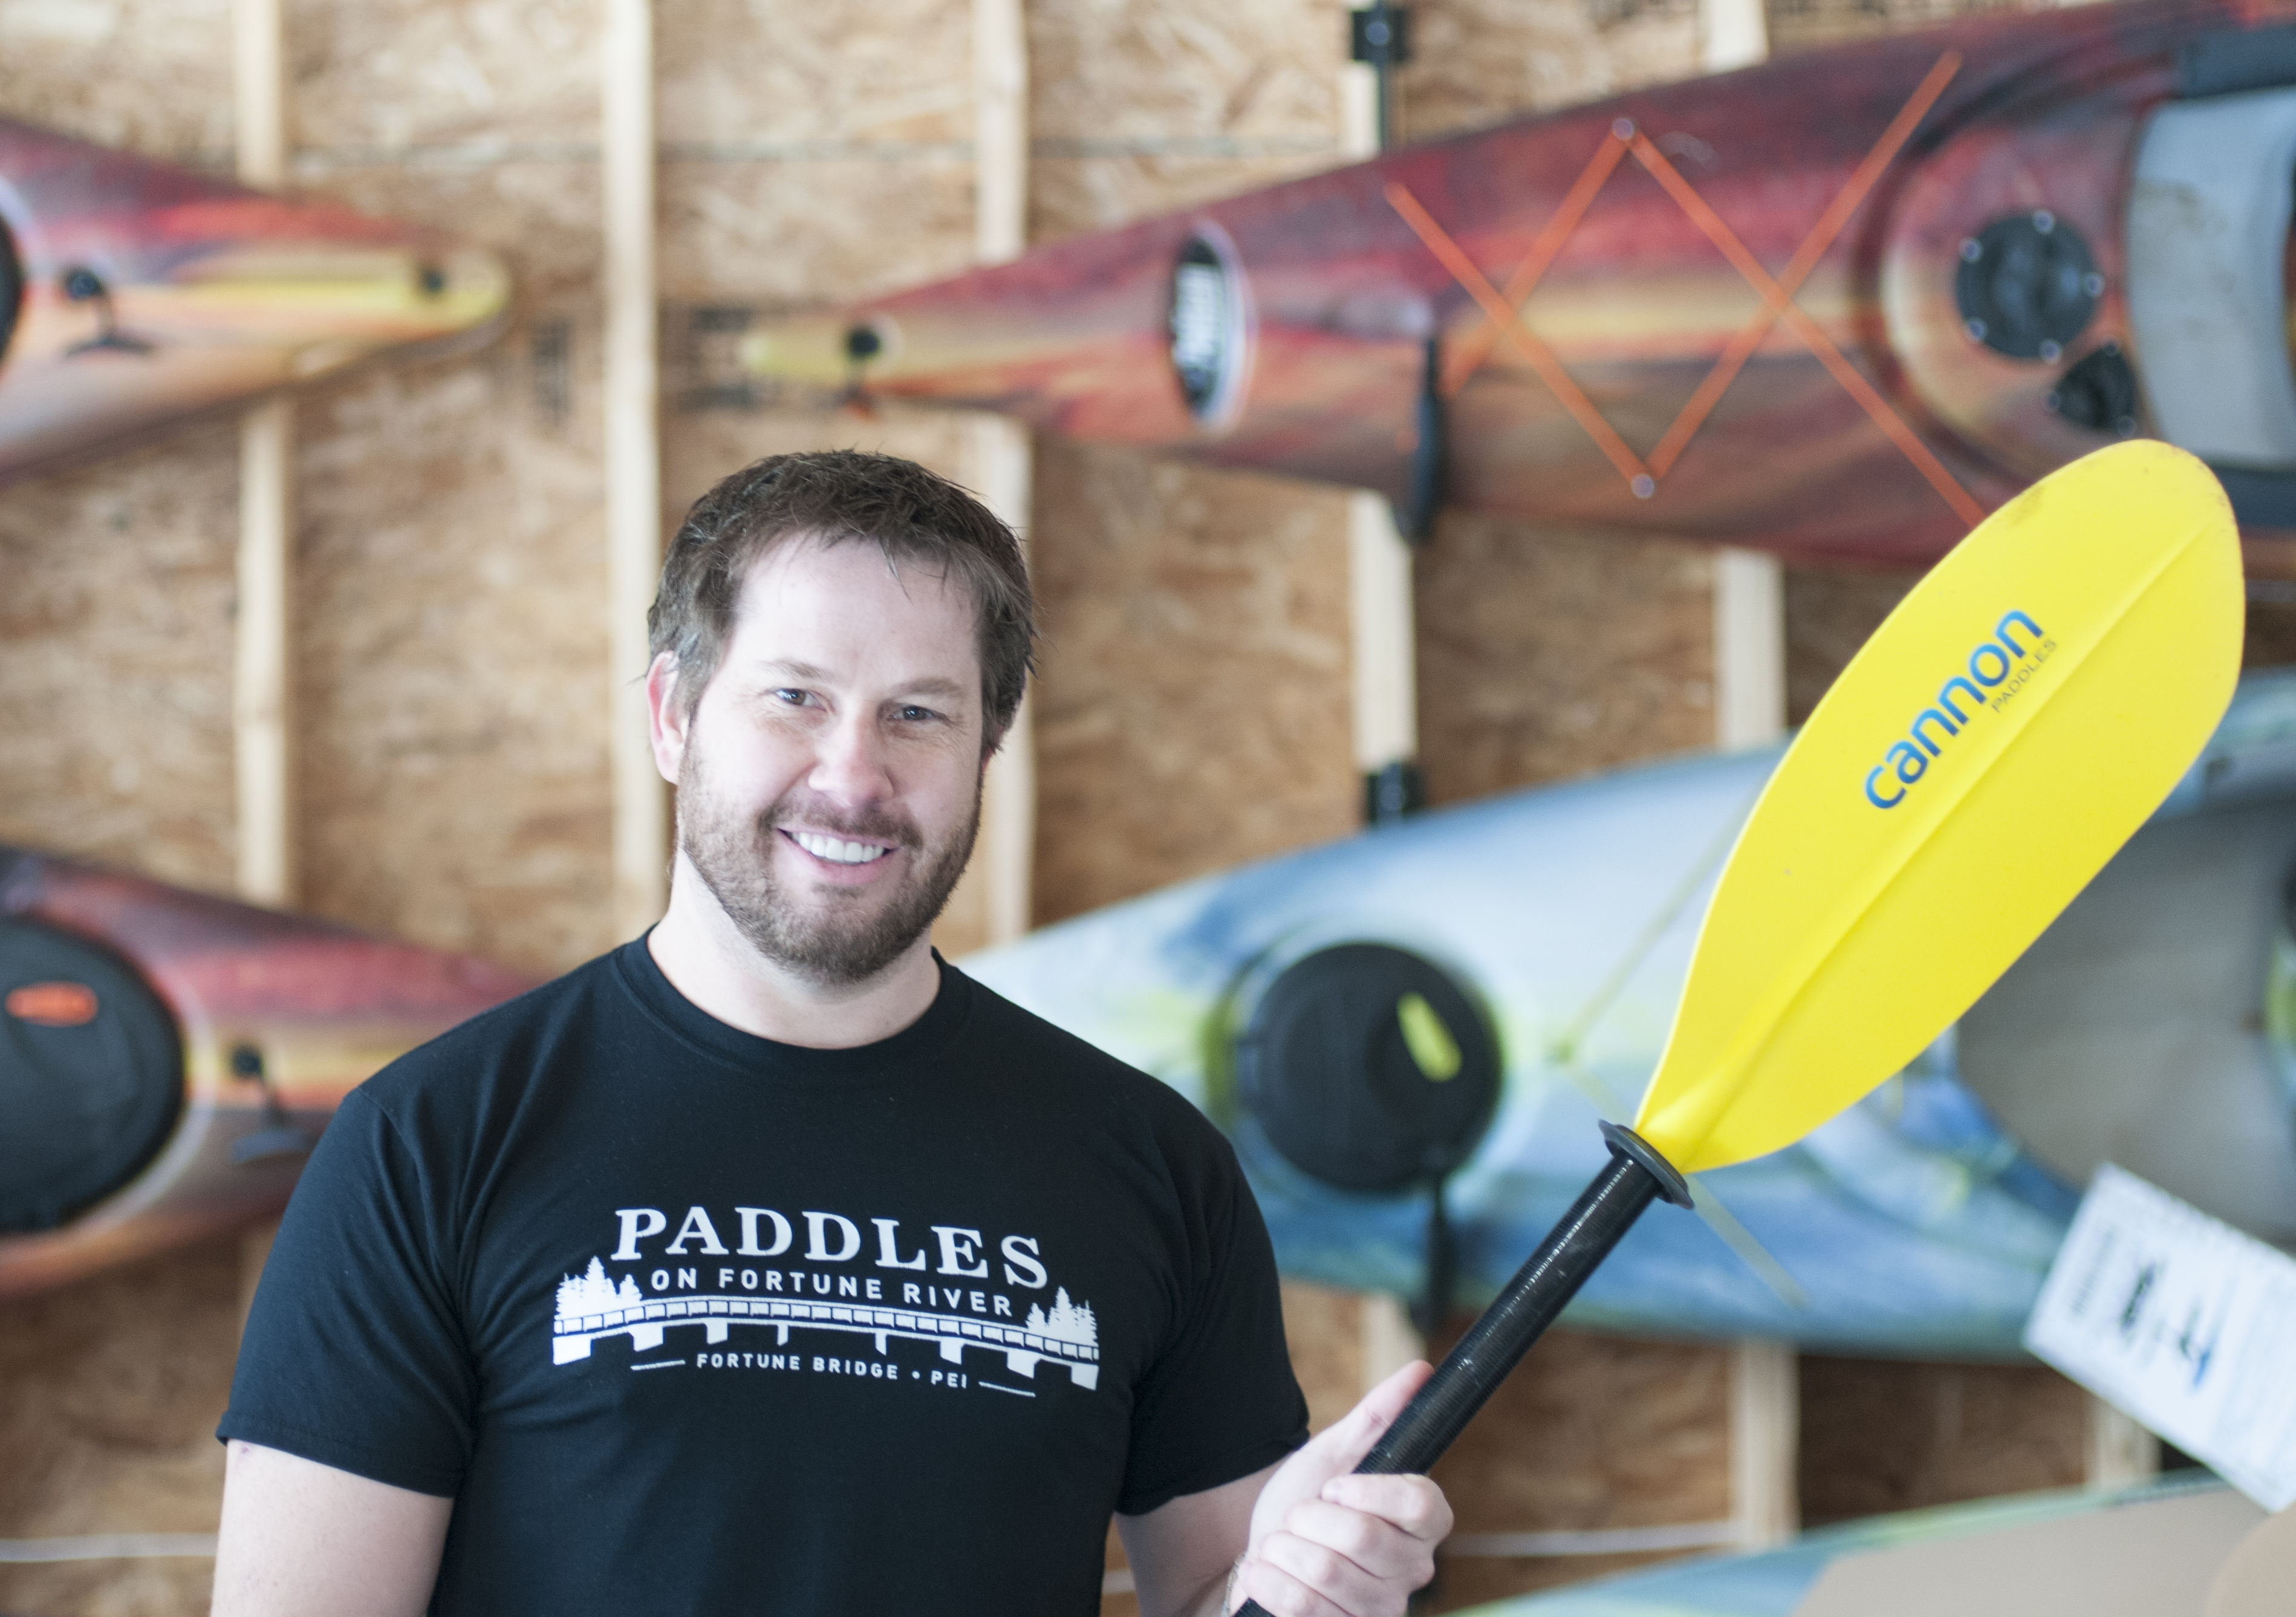 Image of man with paddle, recipient of Small Business Investment Grant